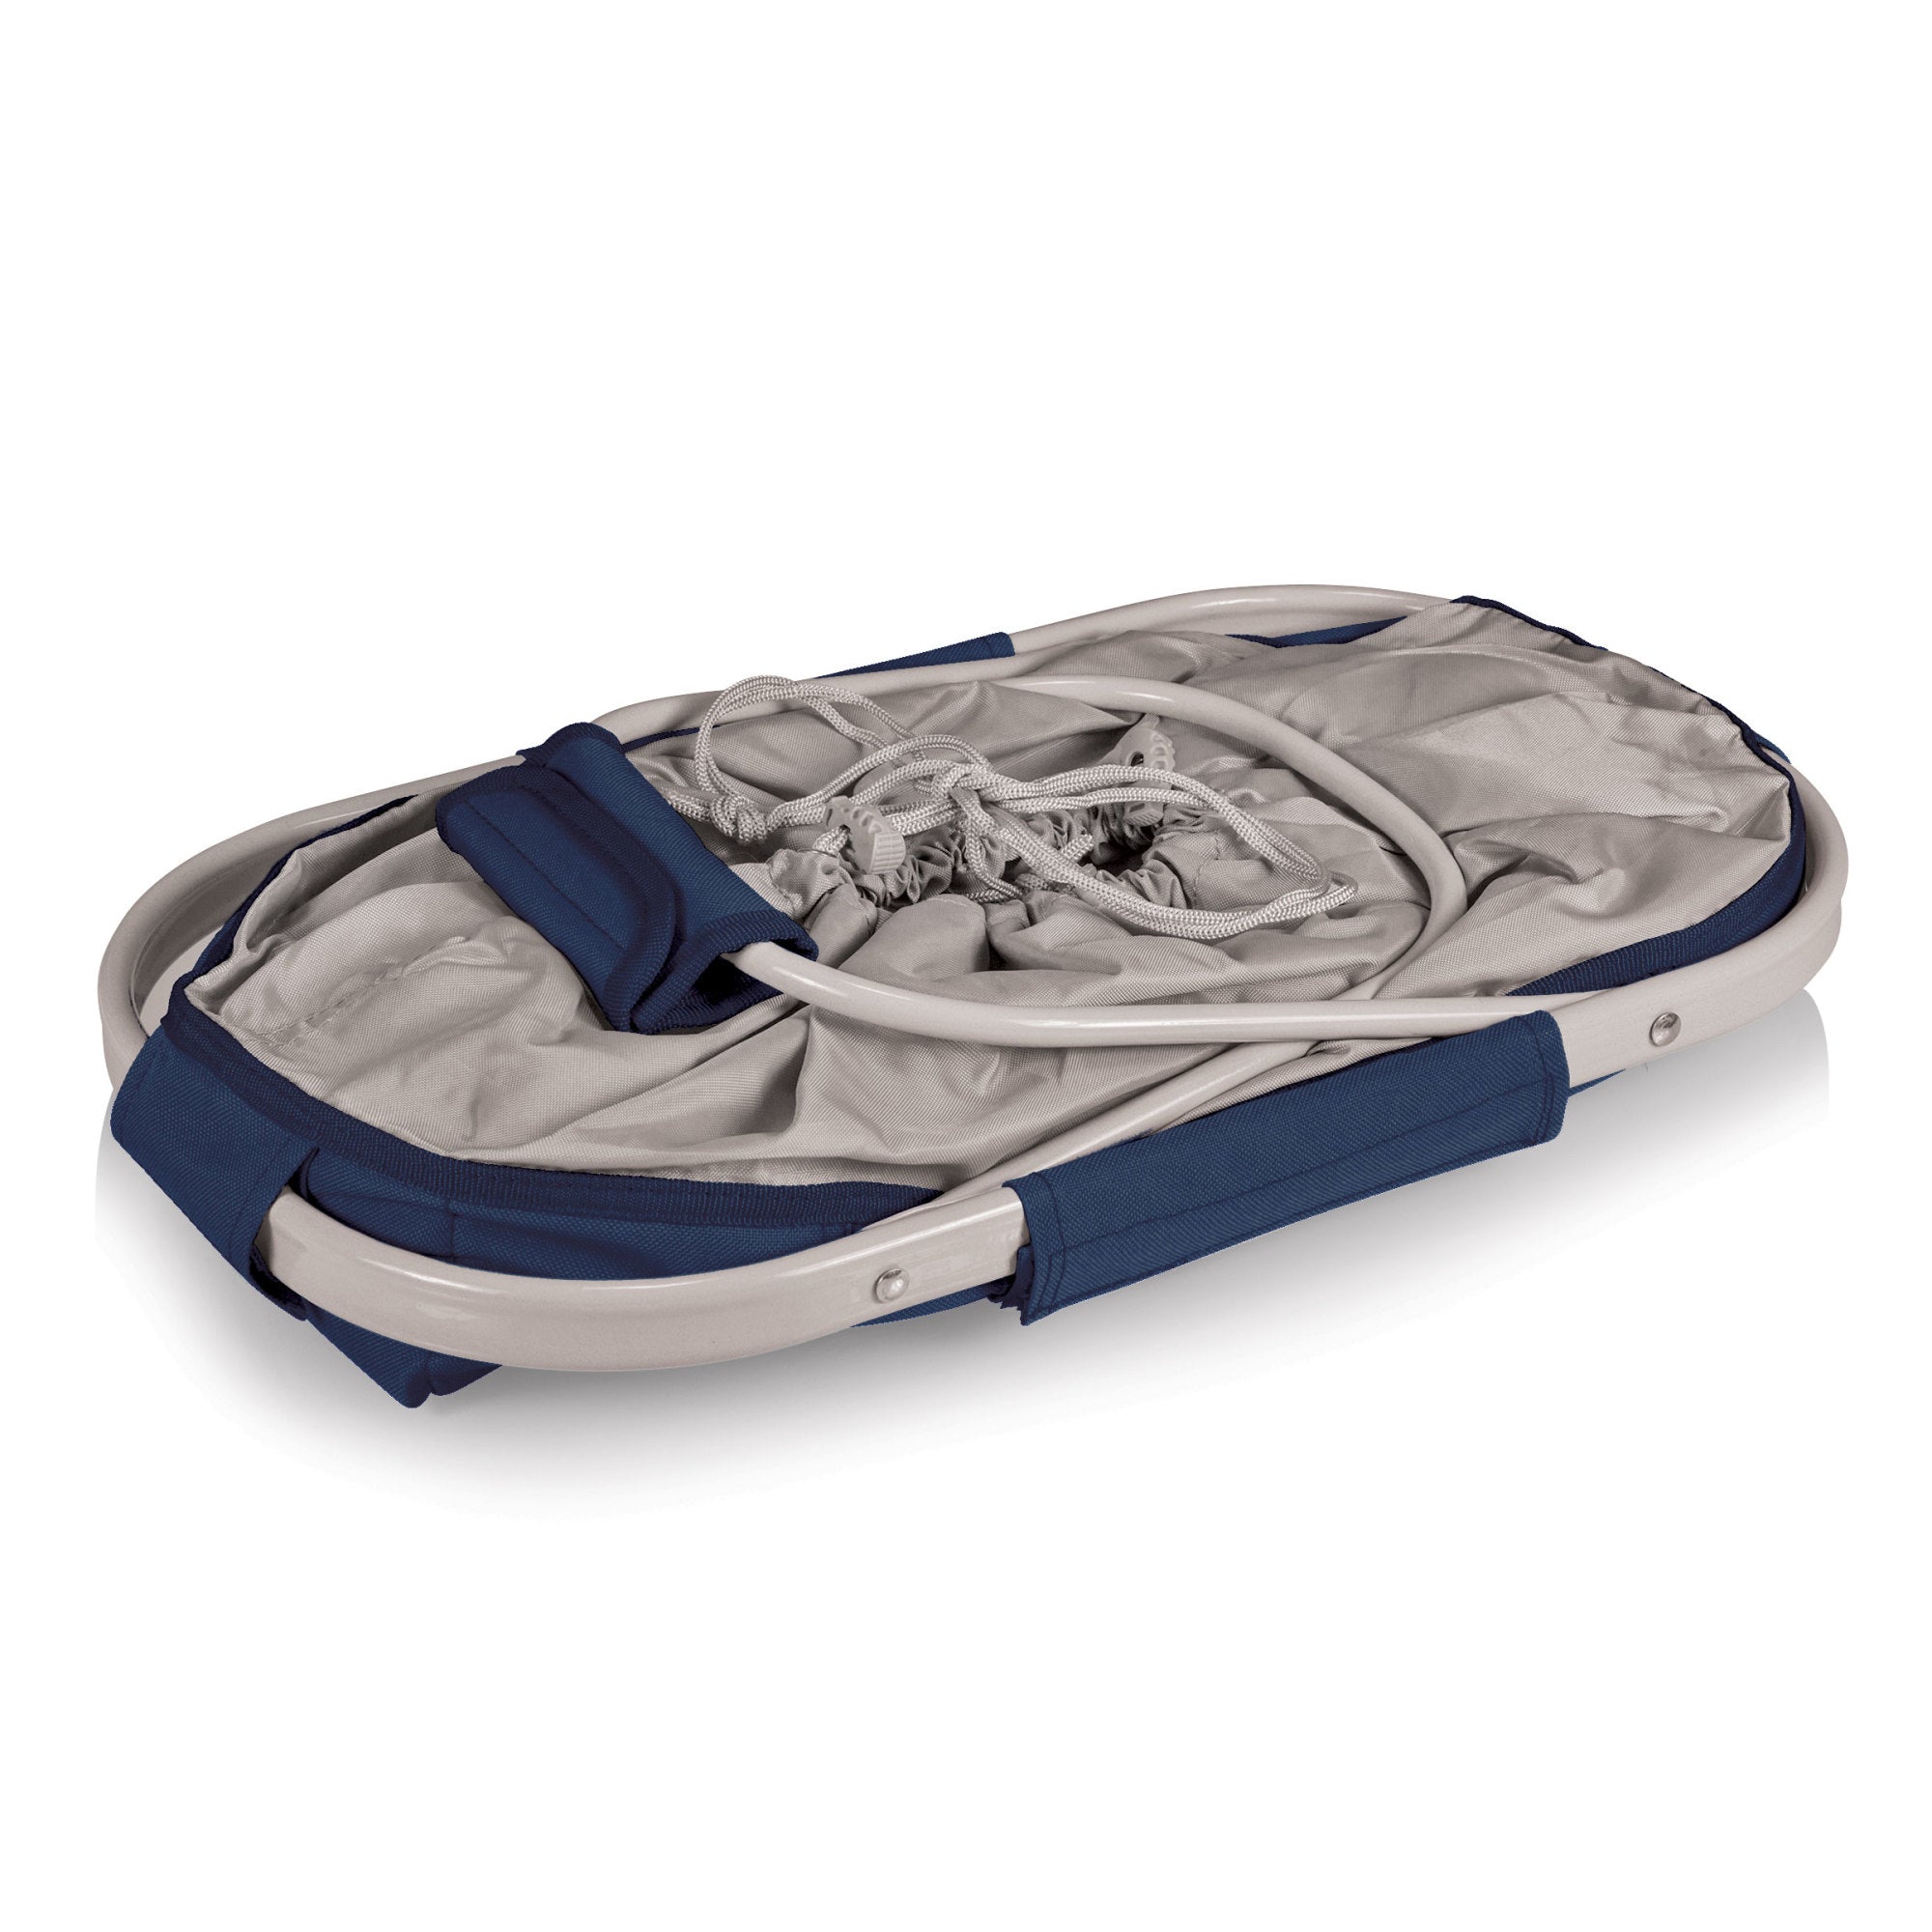 Beauty & the Beast - Metro Basket Collapsible Cooler Tote